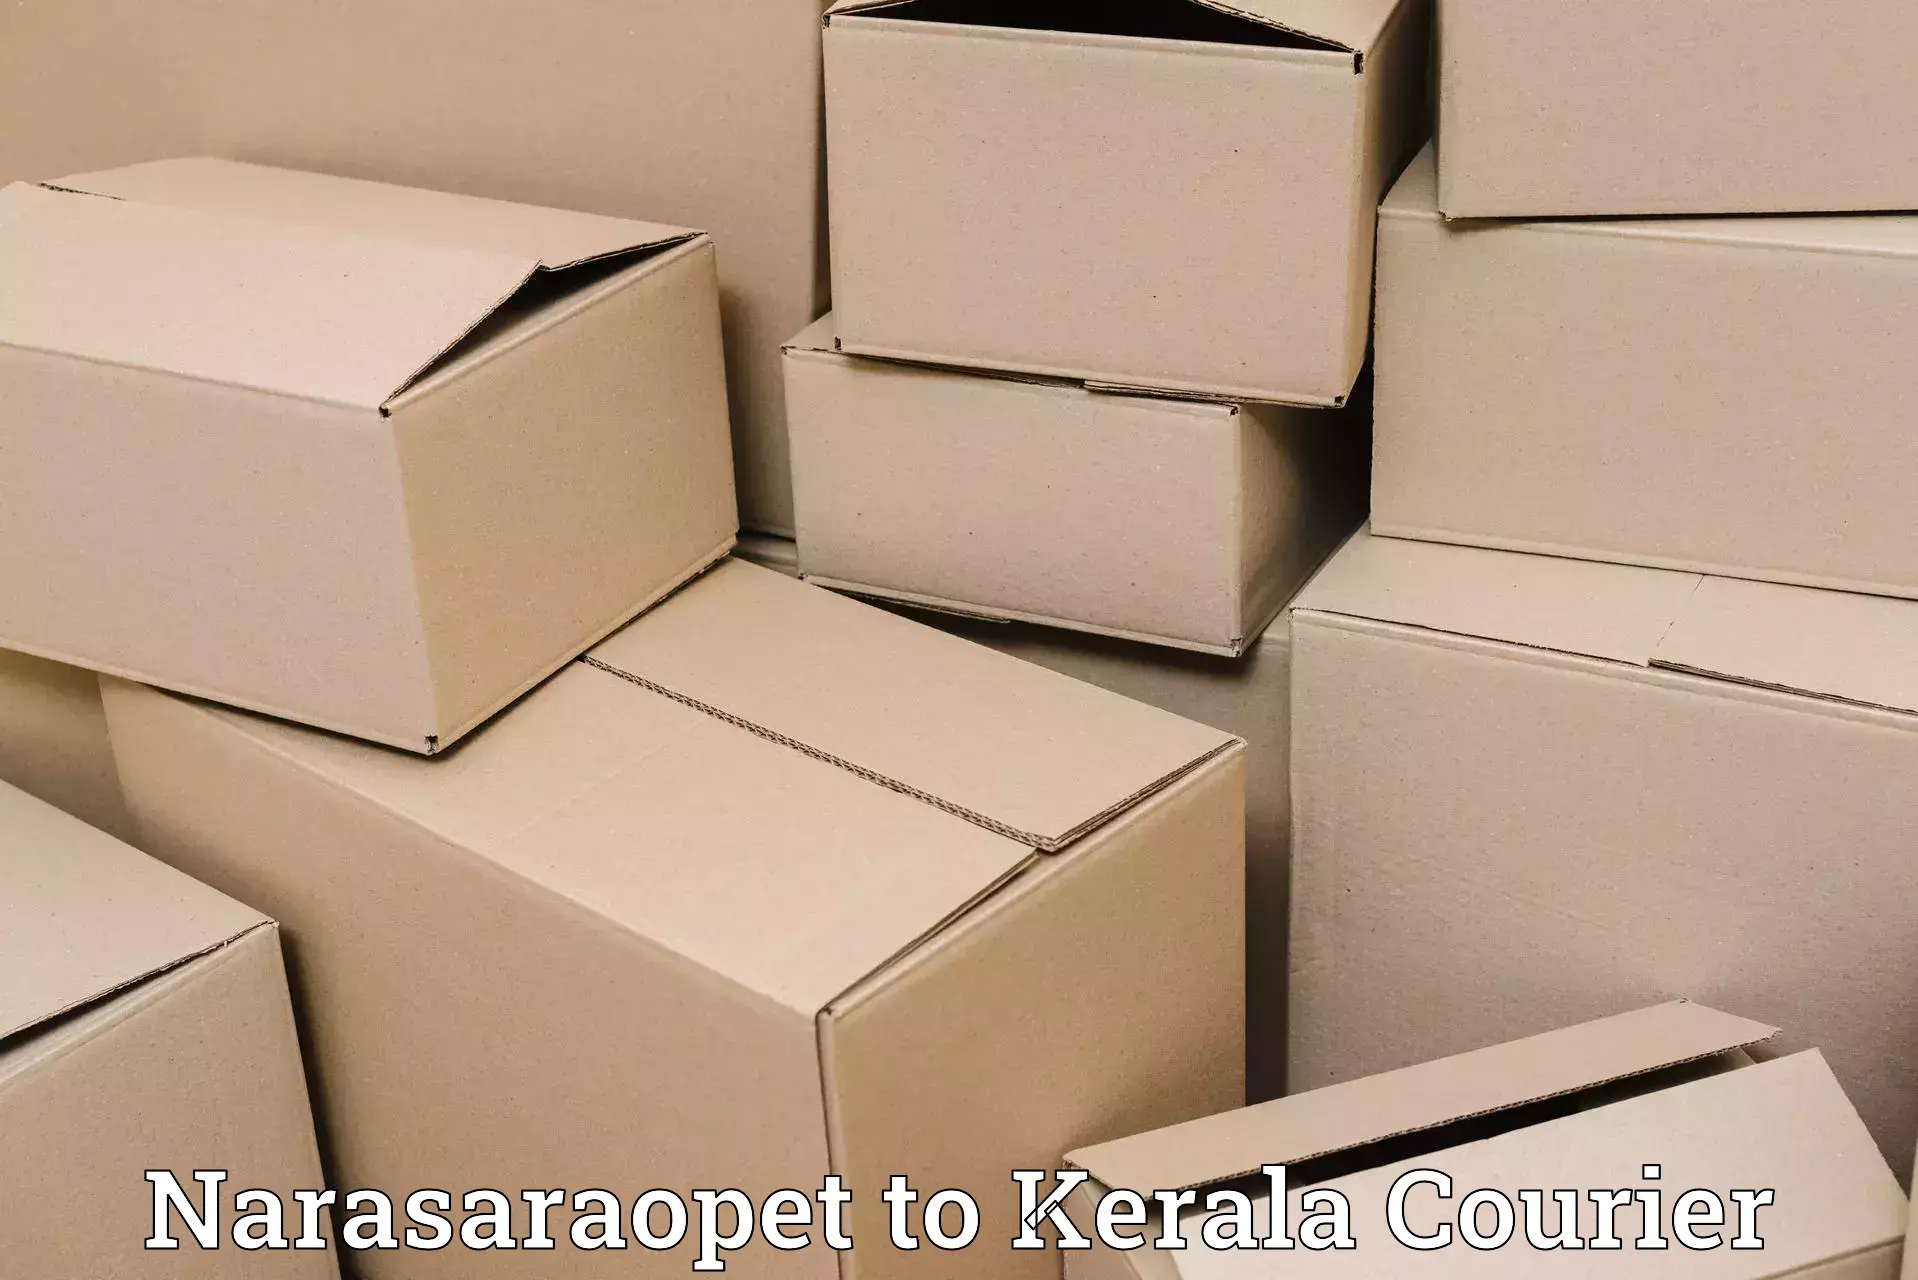 Overnight delivery services Narasaraopet to Malappuram